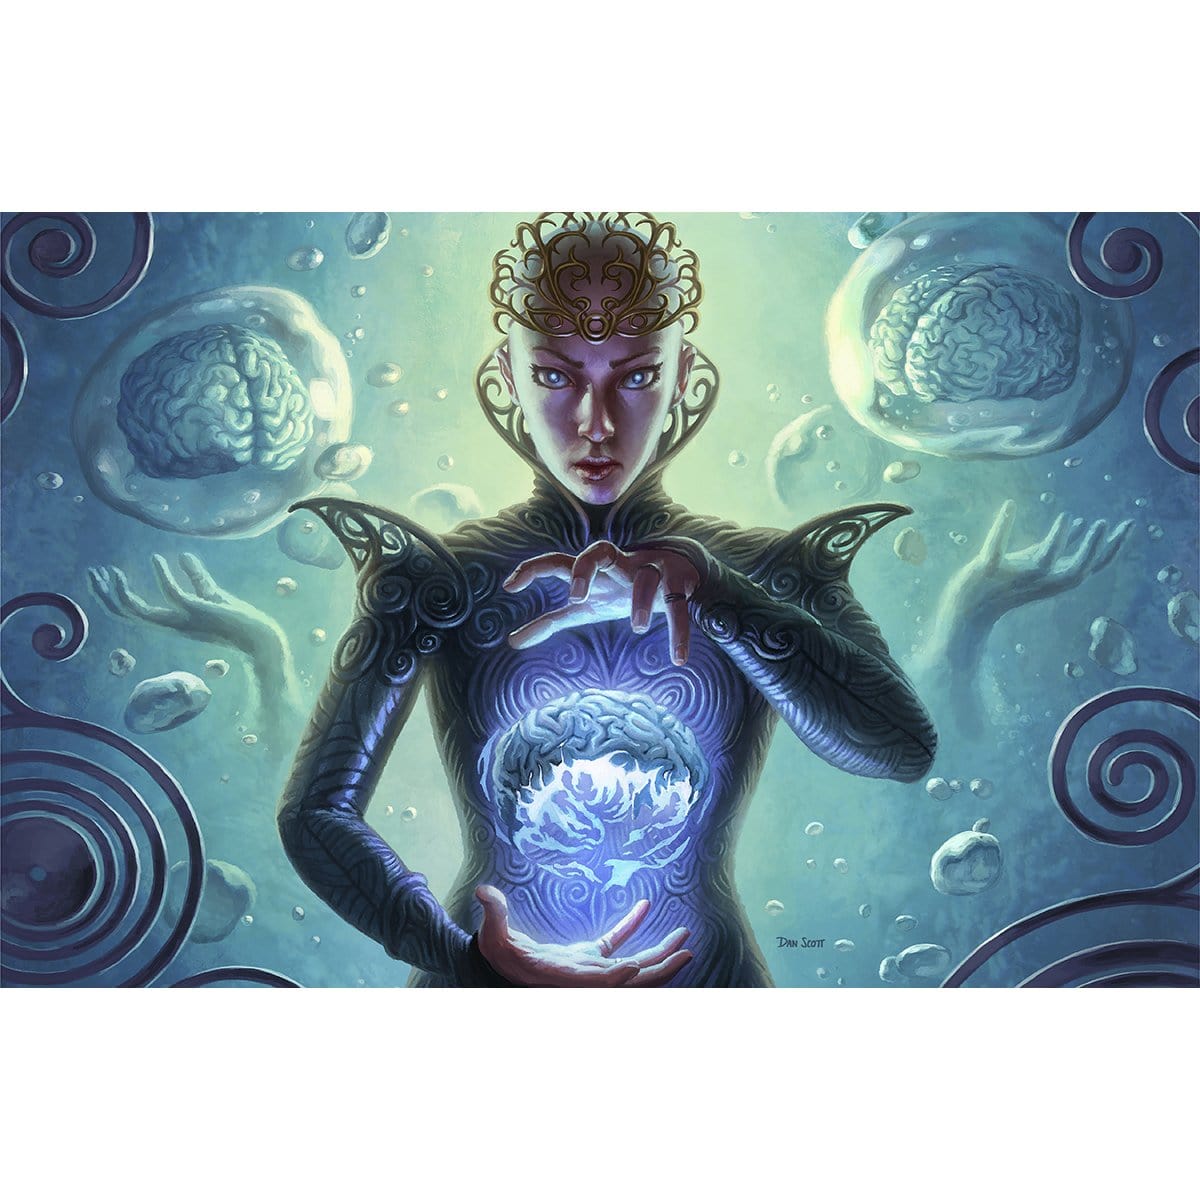 Willbreaker Print - Print - Original Magic Art - Accessories for Magic the Gathering and other card games